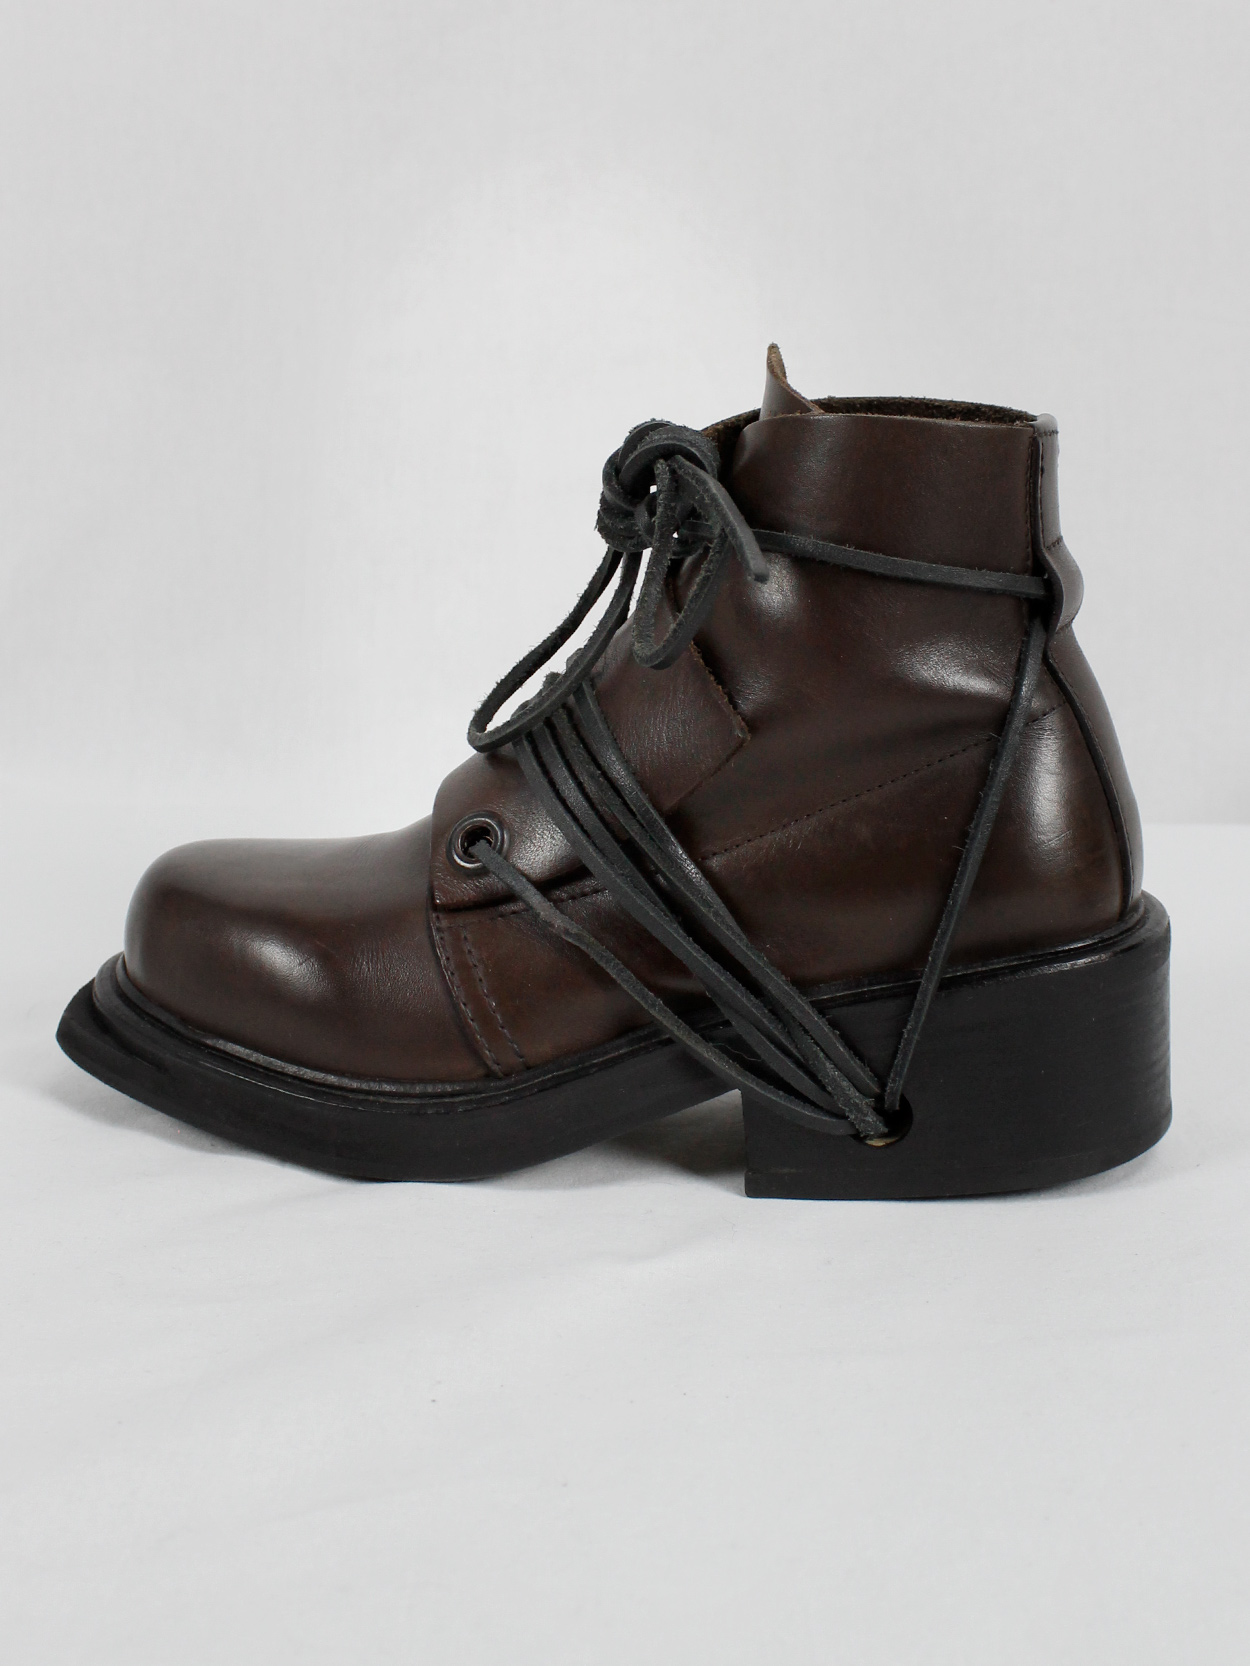 vaniitas Dirk Bikkembergs brown mountaineering boots with laces through the soles 1990s (18)